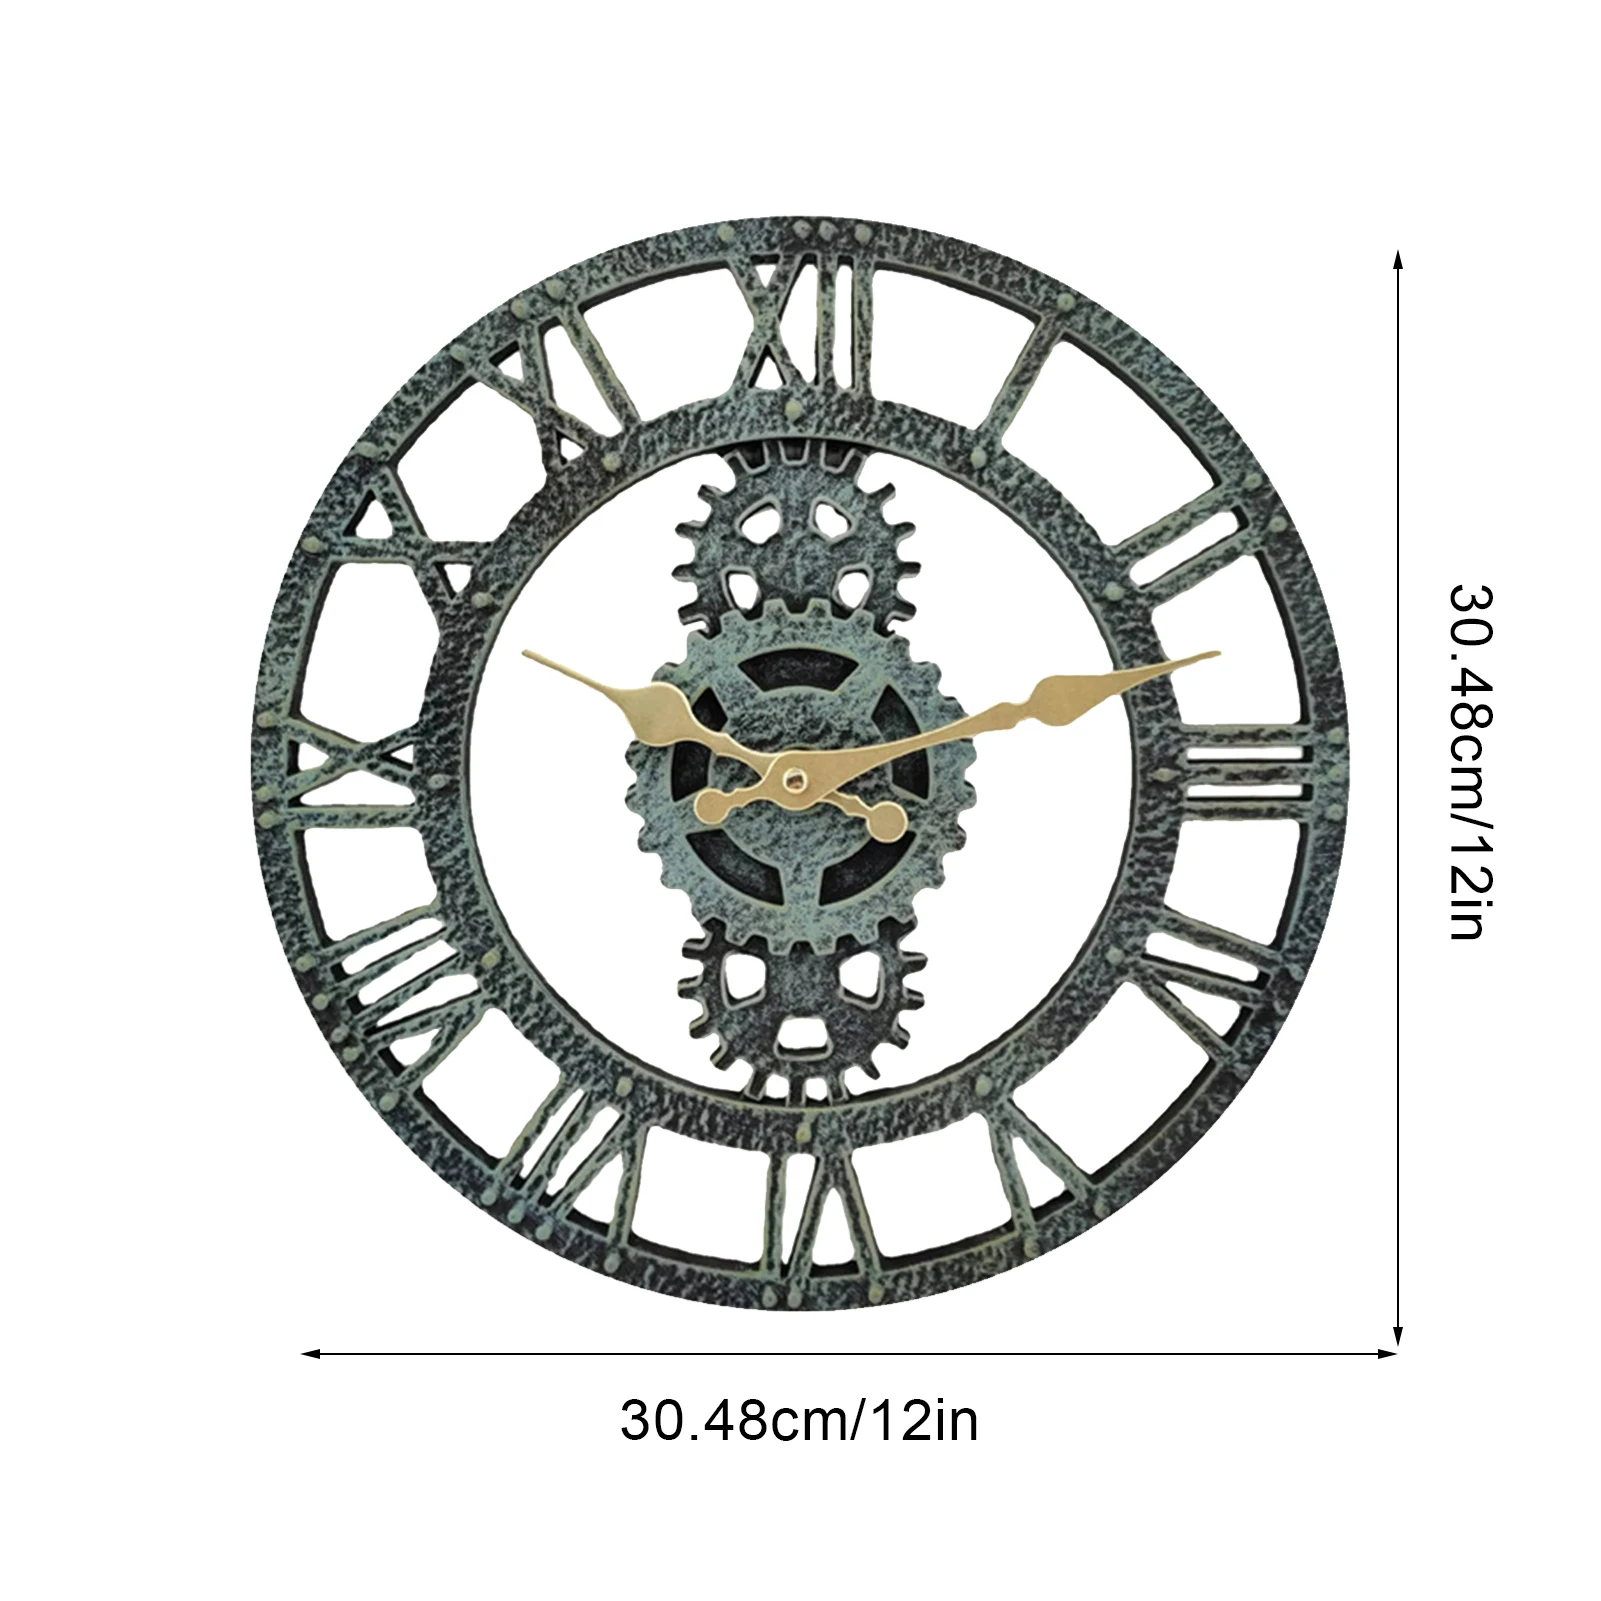 Industrial Gear Wall Clock Decorative Retro Wall Clock Industrial Age Style Room Decoration Wall Art Decor Without Battery images - 6